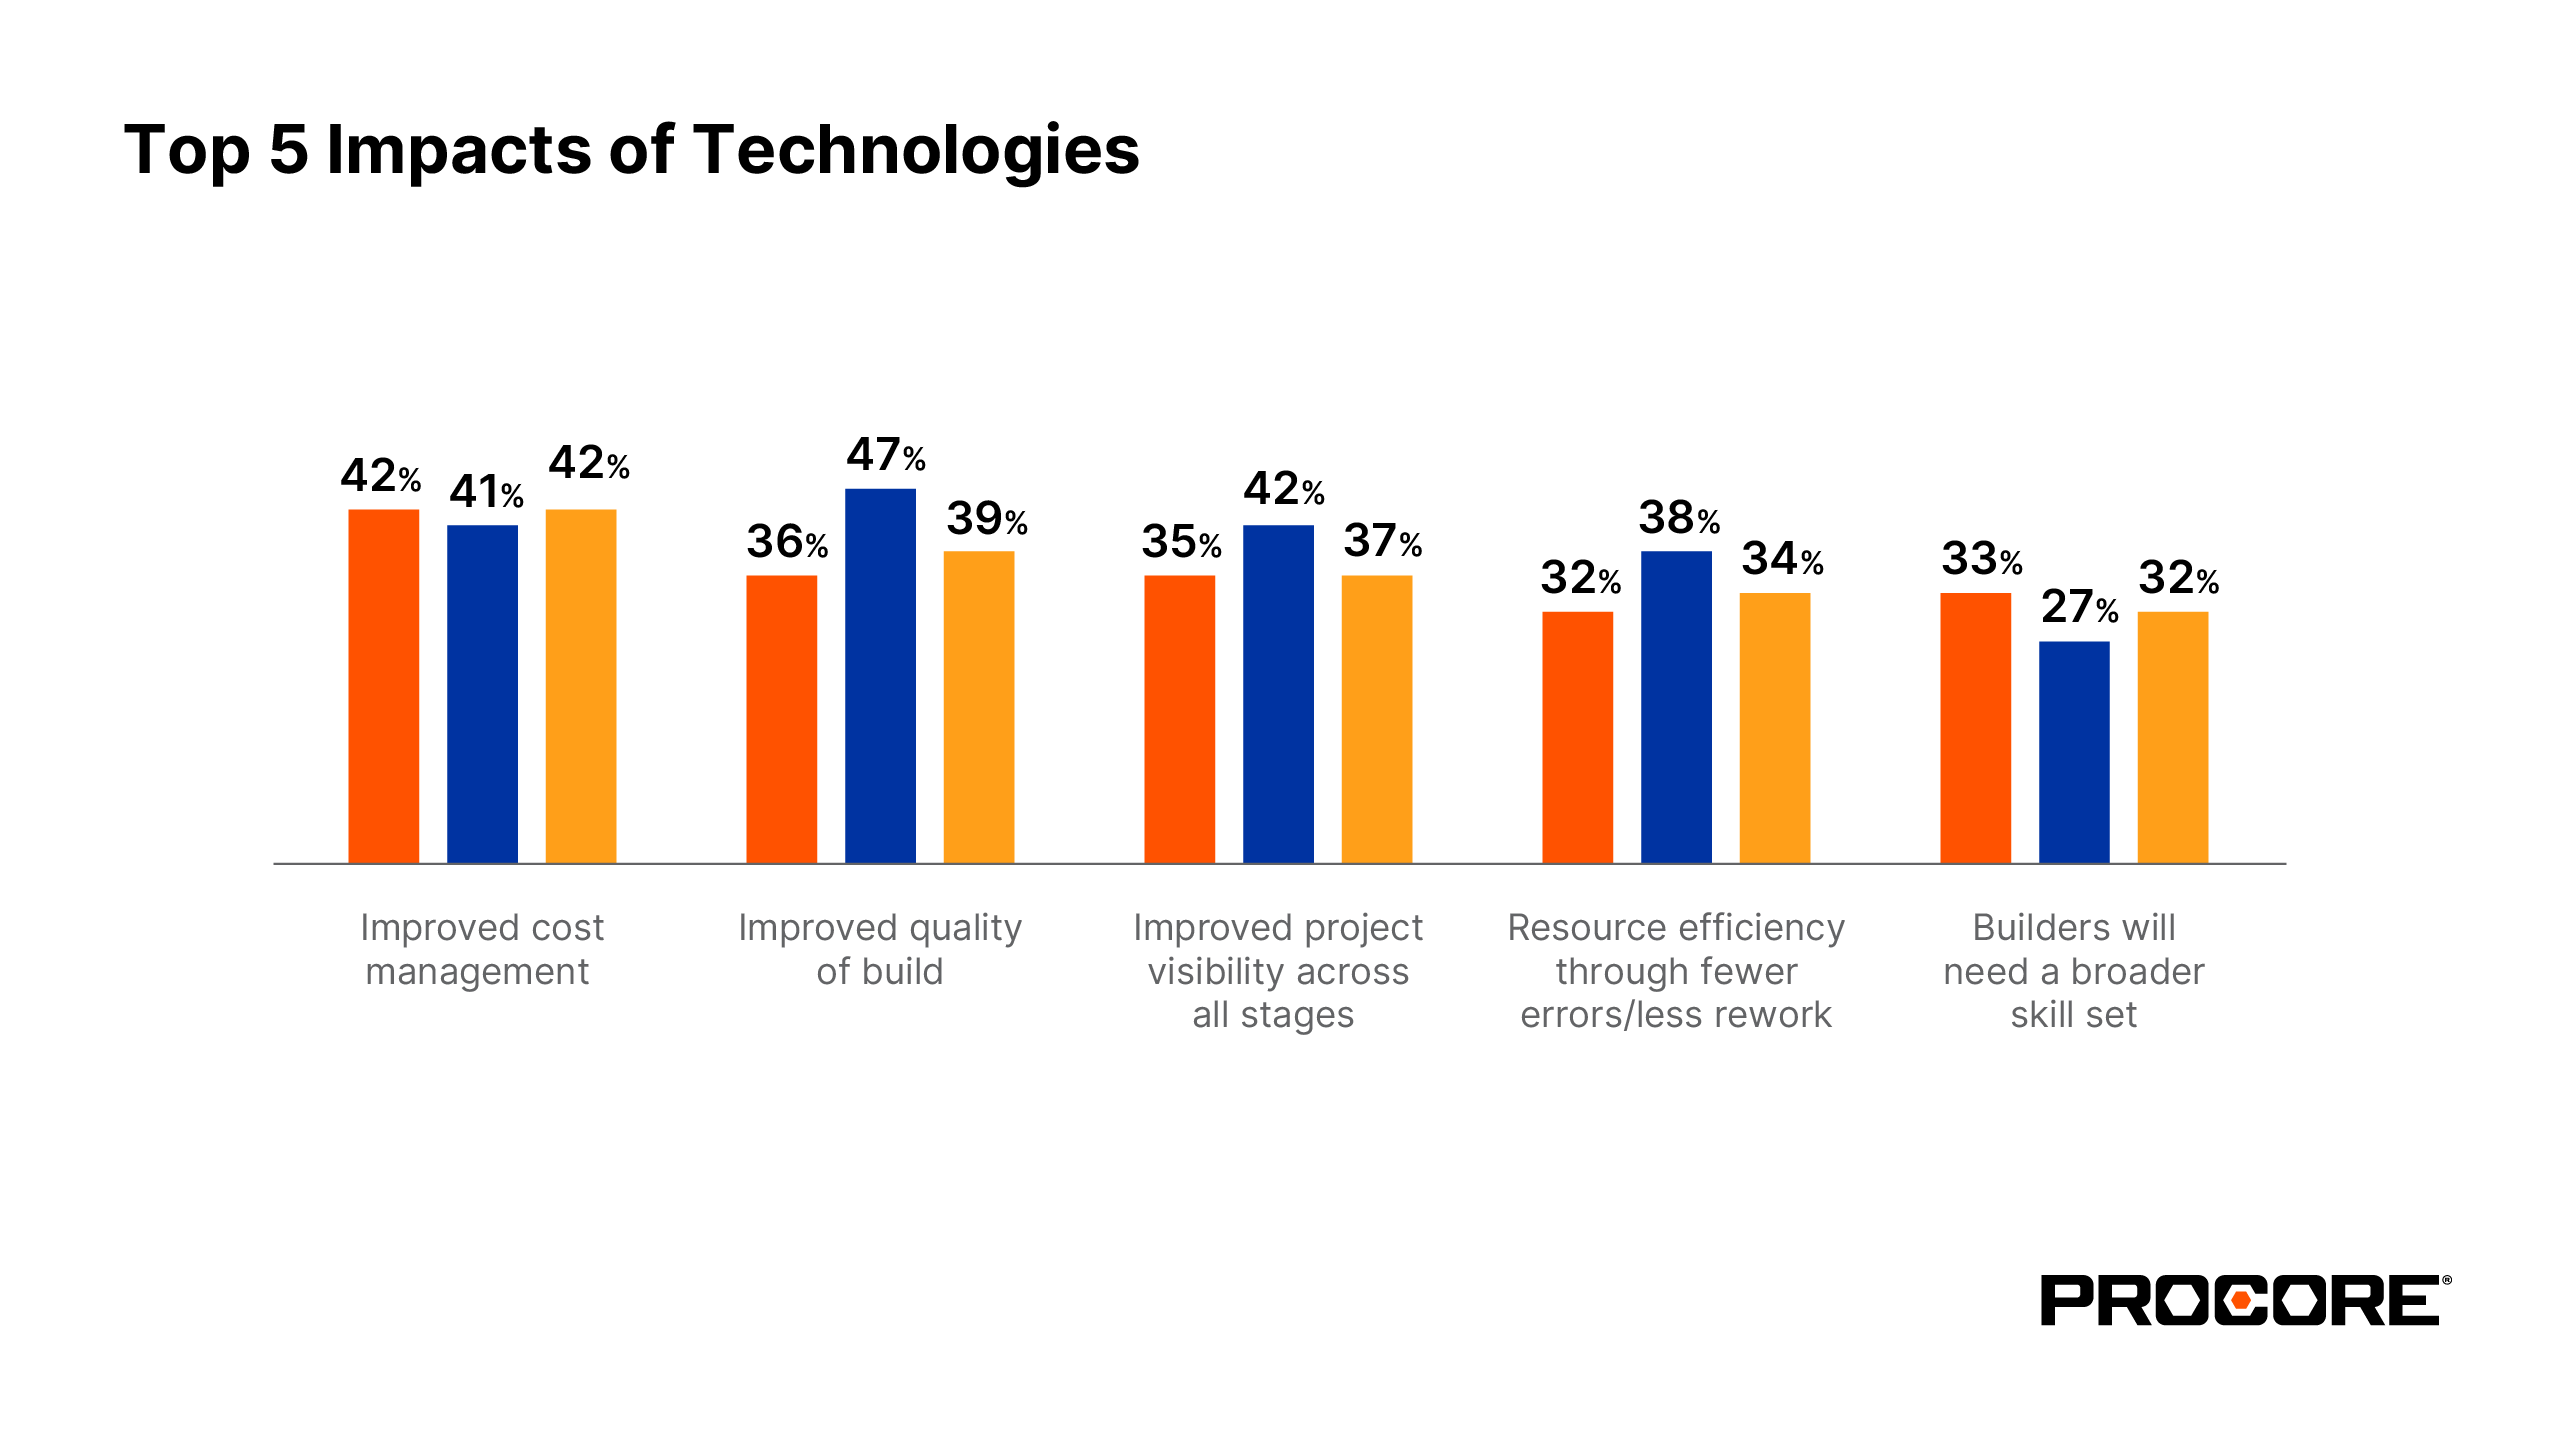 Top 5 impacts of technologies charts